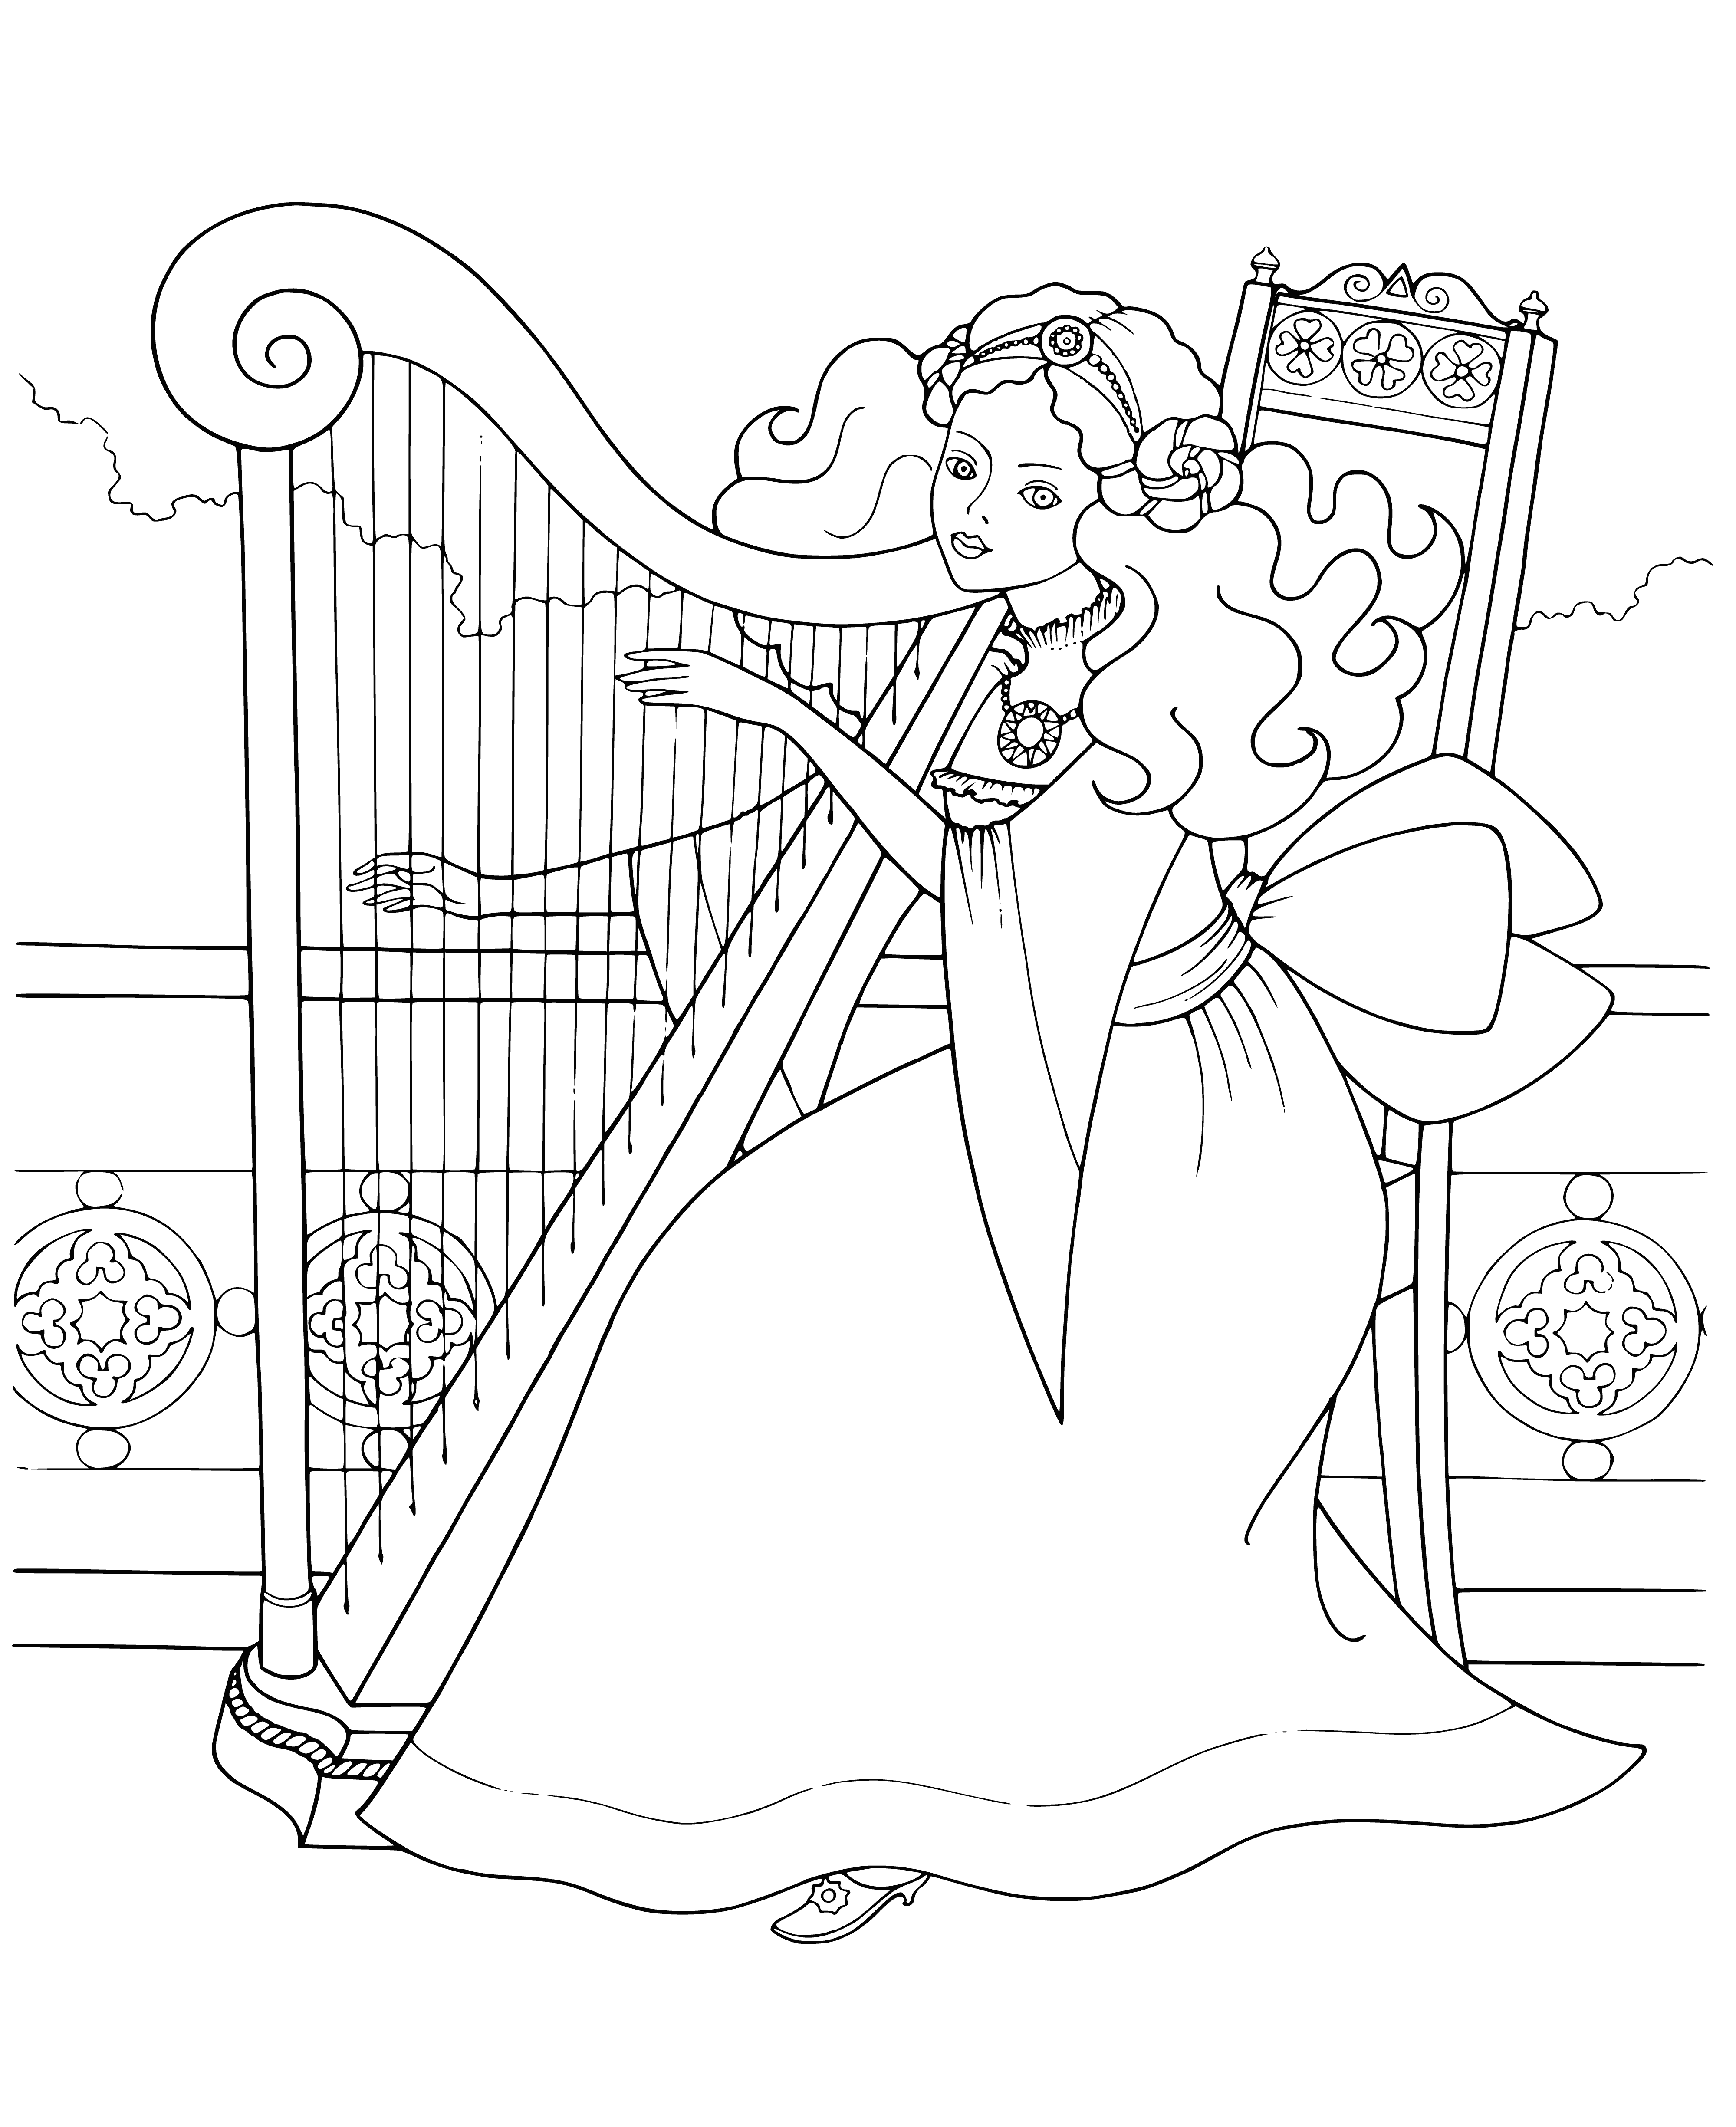 coloring page: Girl in light blue dress with a crown plays a harp while sitting on a stool. Blonde hair in a ponytail. #coloringpage